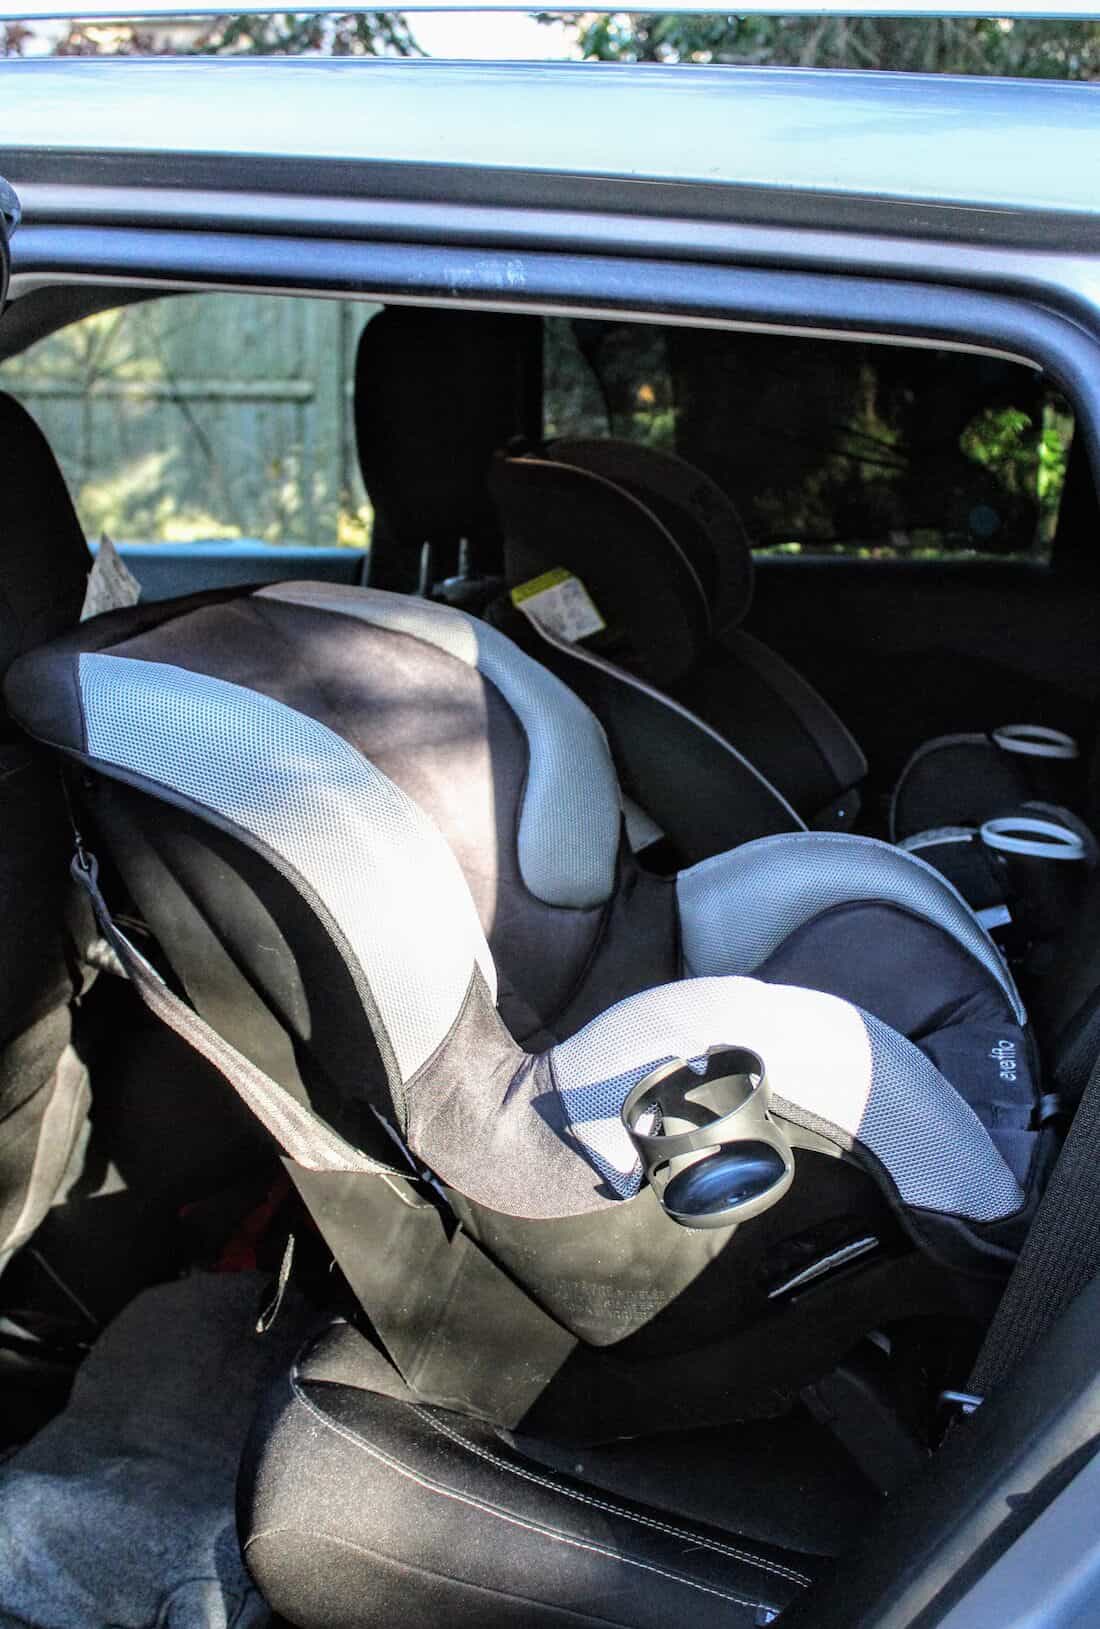 Evenflo Car Seat installed into car.